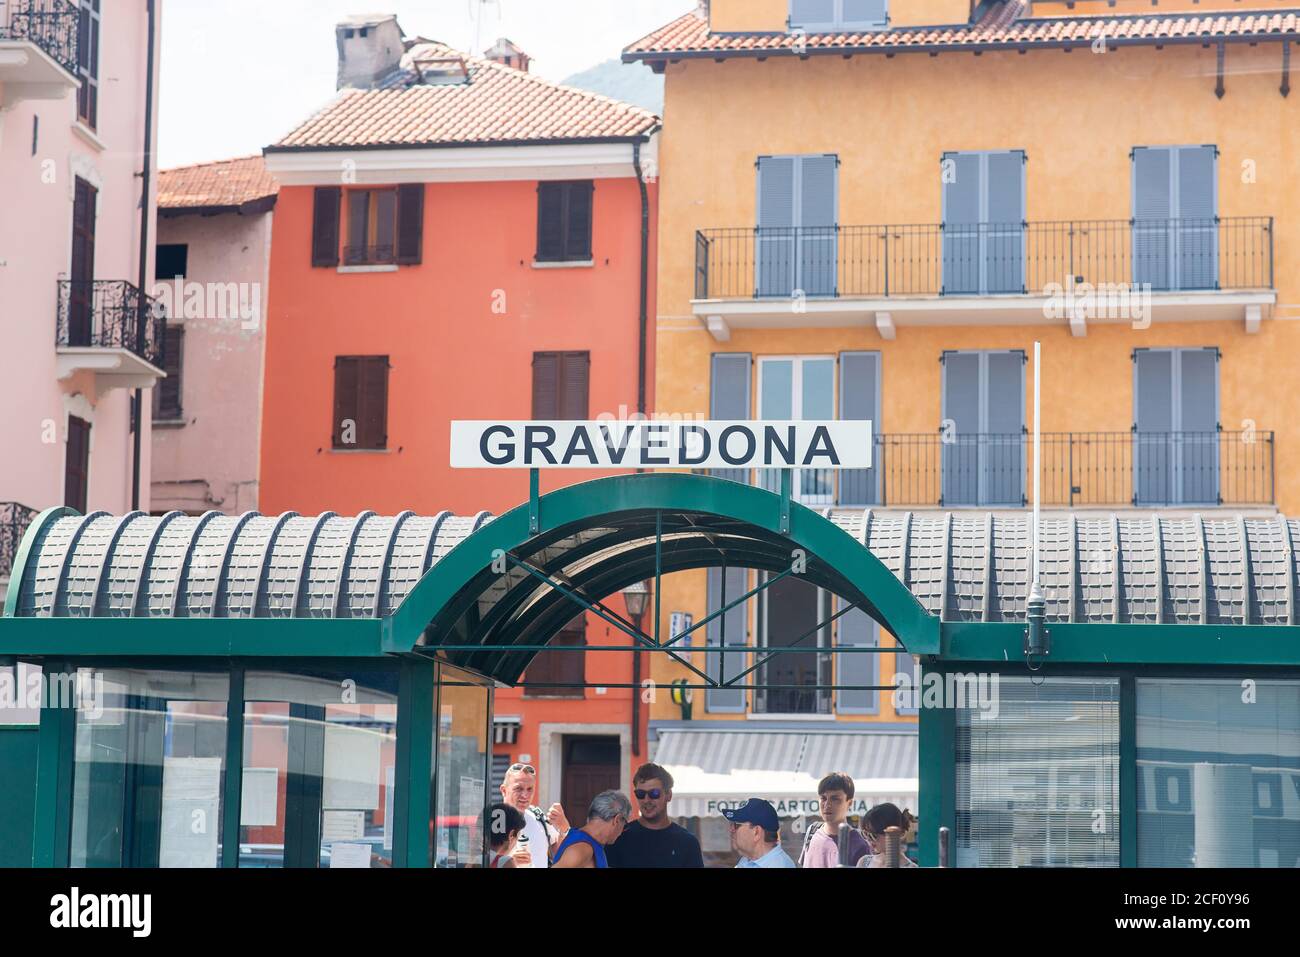 Gravedona. Lake Como. Italy - July 21, 2019: Ferry Pier in the Commune of Gravedona. Lombardy. Signboard with Name of the City. Stock Photo